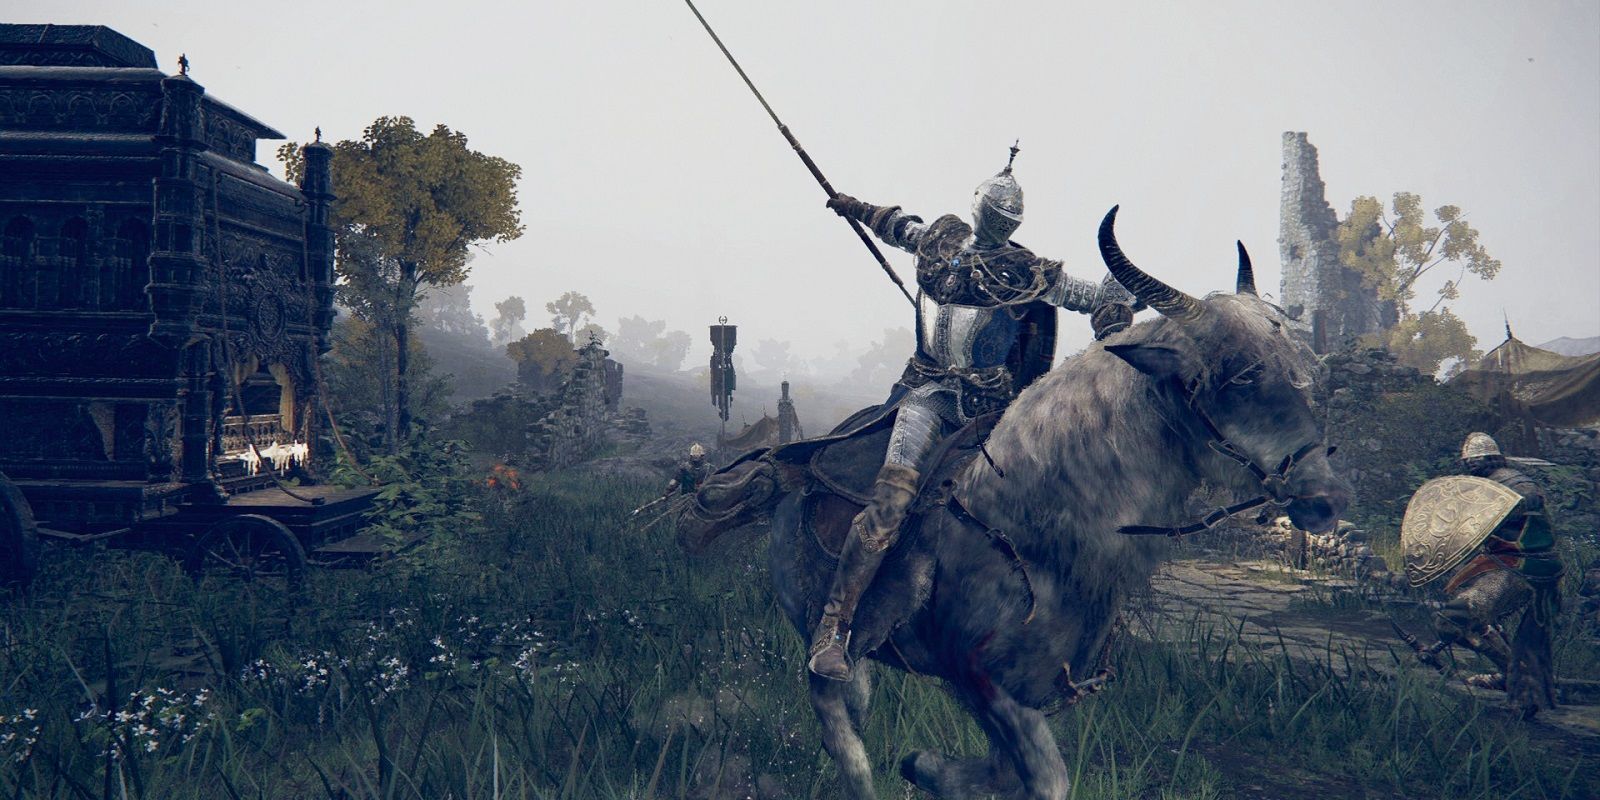 Elden Ring players participating in mounted combat while riding a horse.